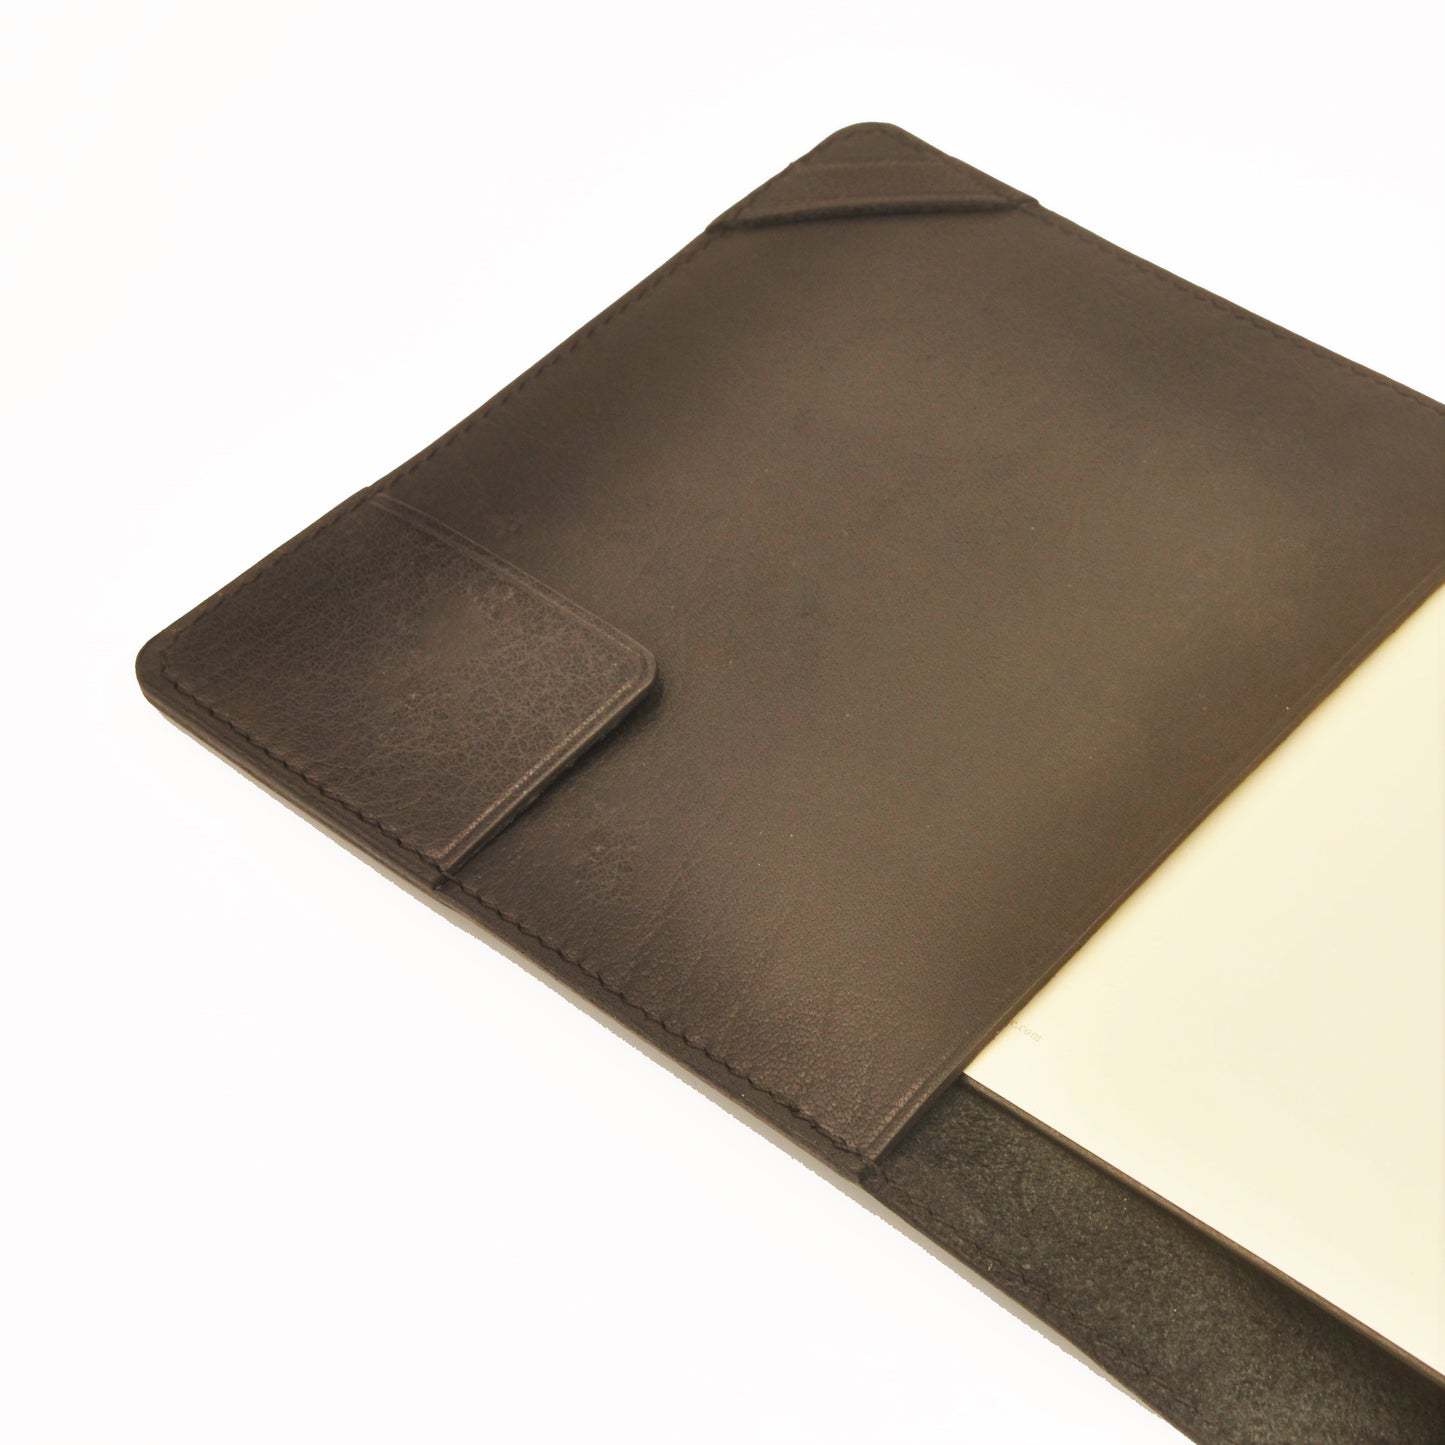 HERITAGE A5-L Journal & Notebook Sleeve